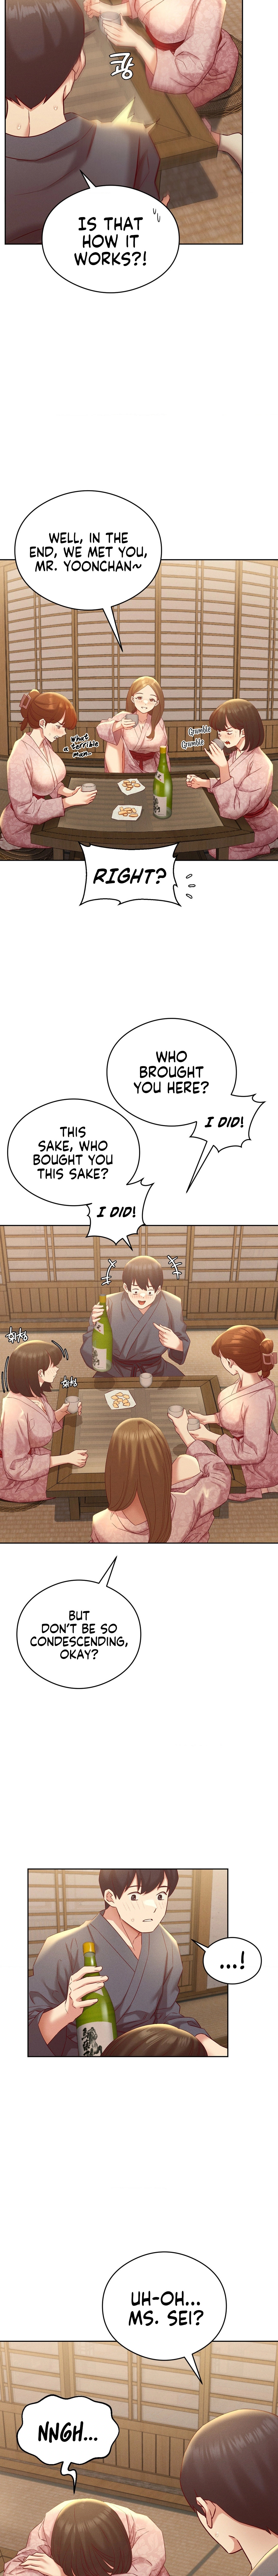 Shall We Go To The Ryokan Together? - Chapter 2 Page 14